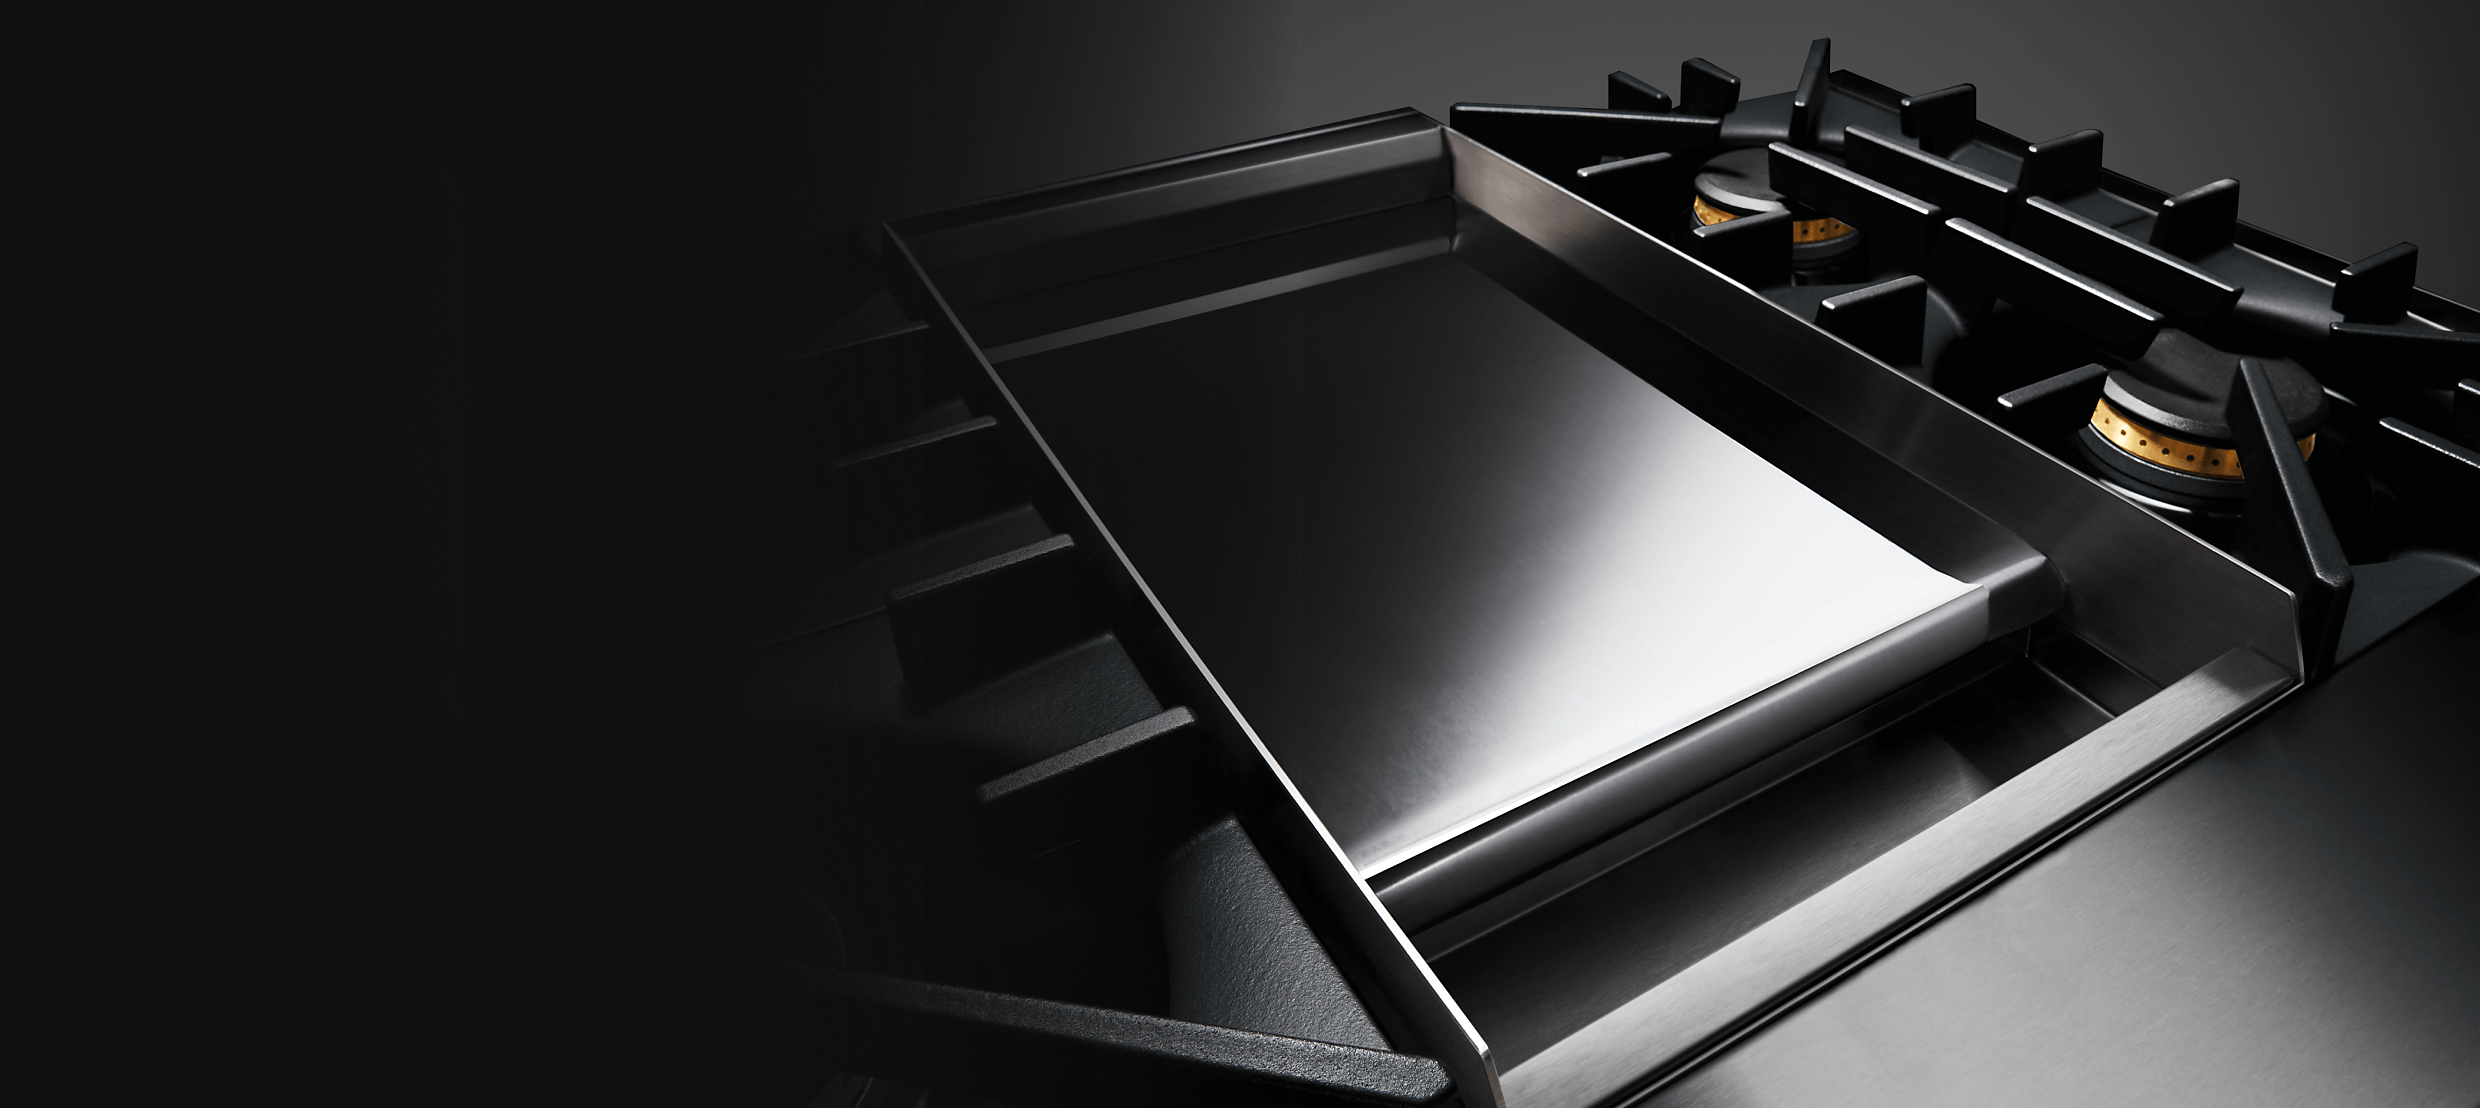  A Chrome-Infused Griddle on a JennAir® Professional Range.